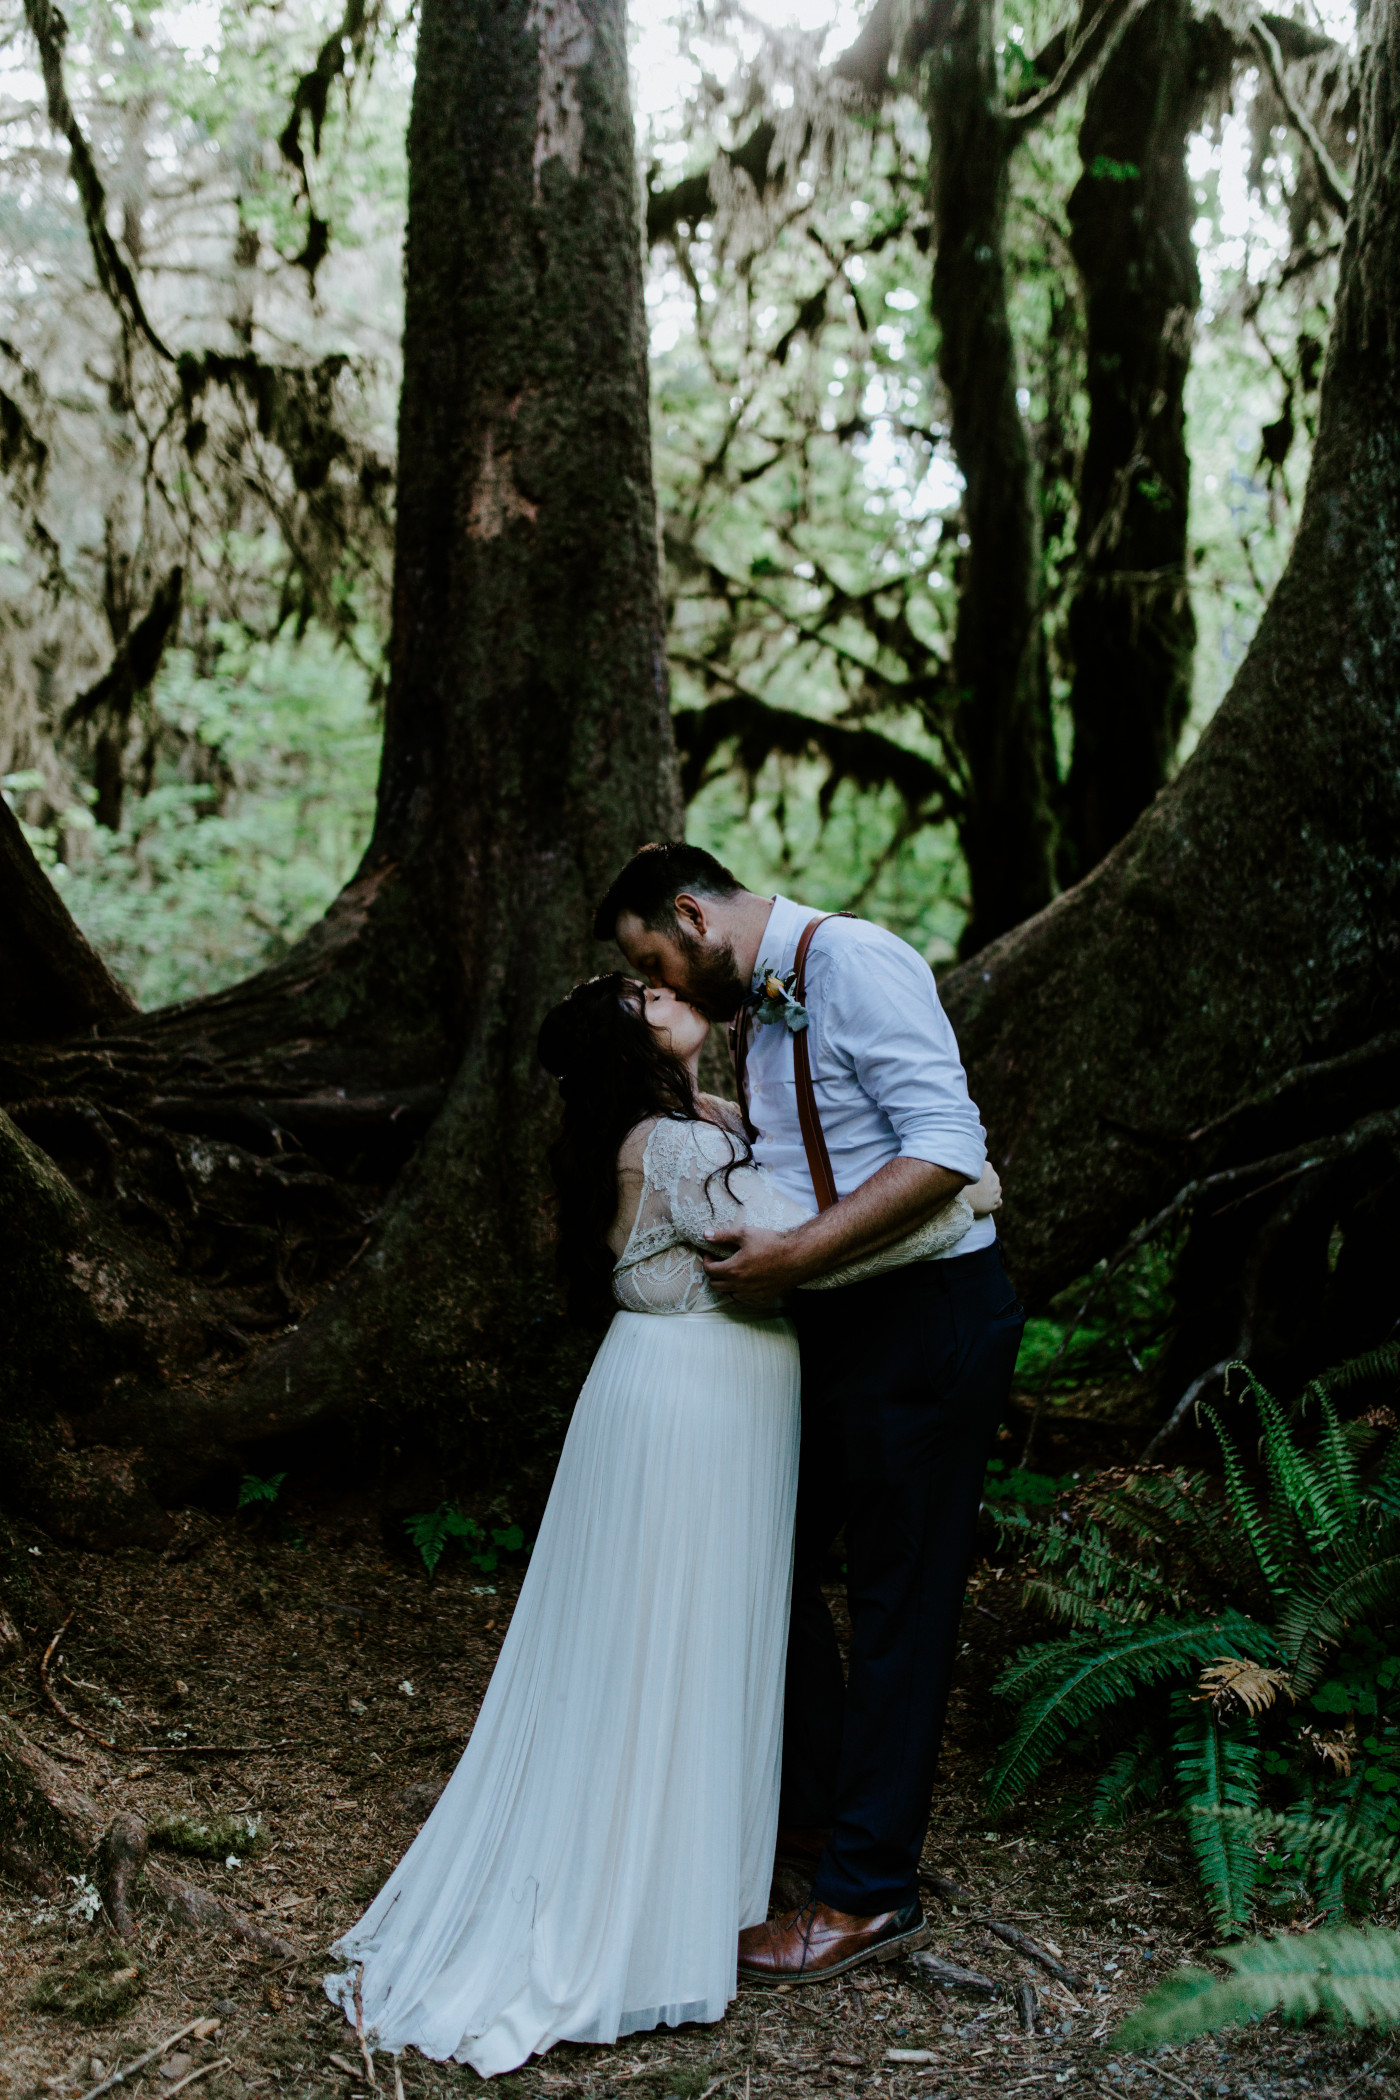 Jack and Brooke kiss in the woods. Elopement photography at Olympic National Park by Sienna Plus Josh.